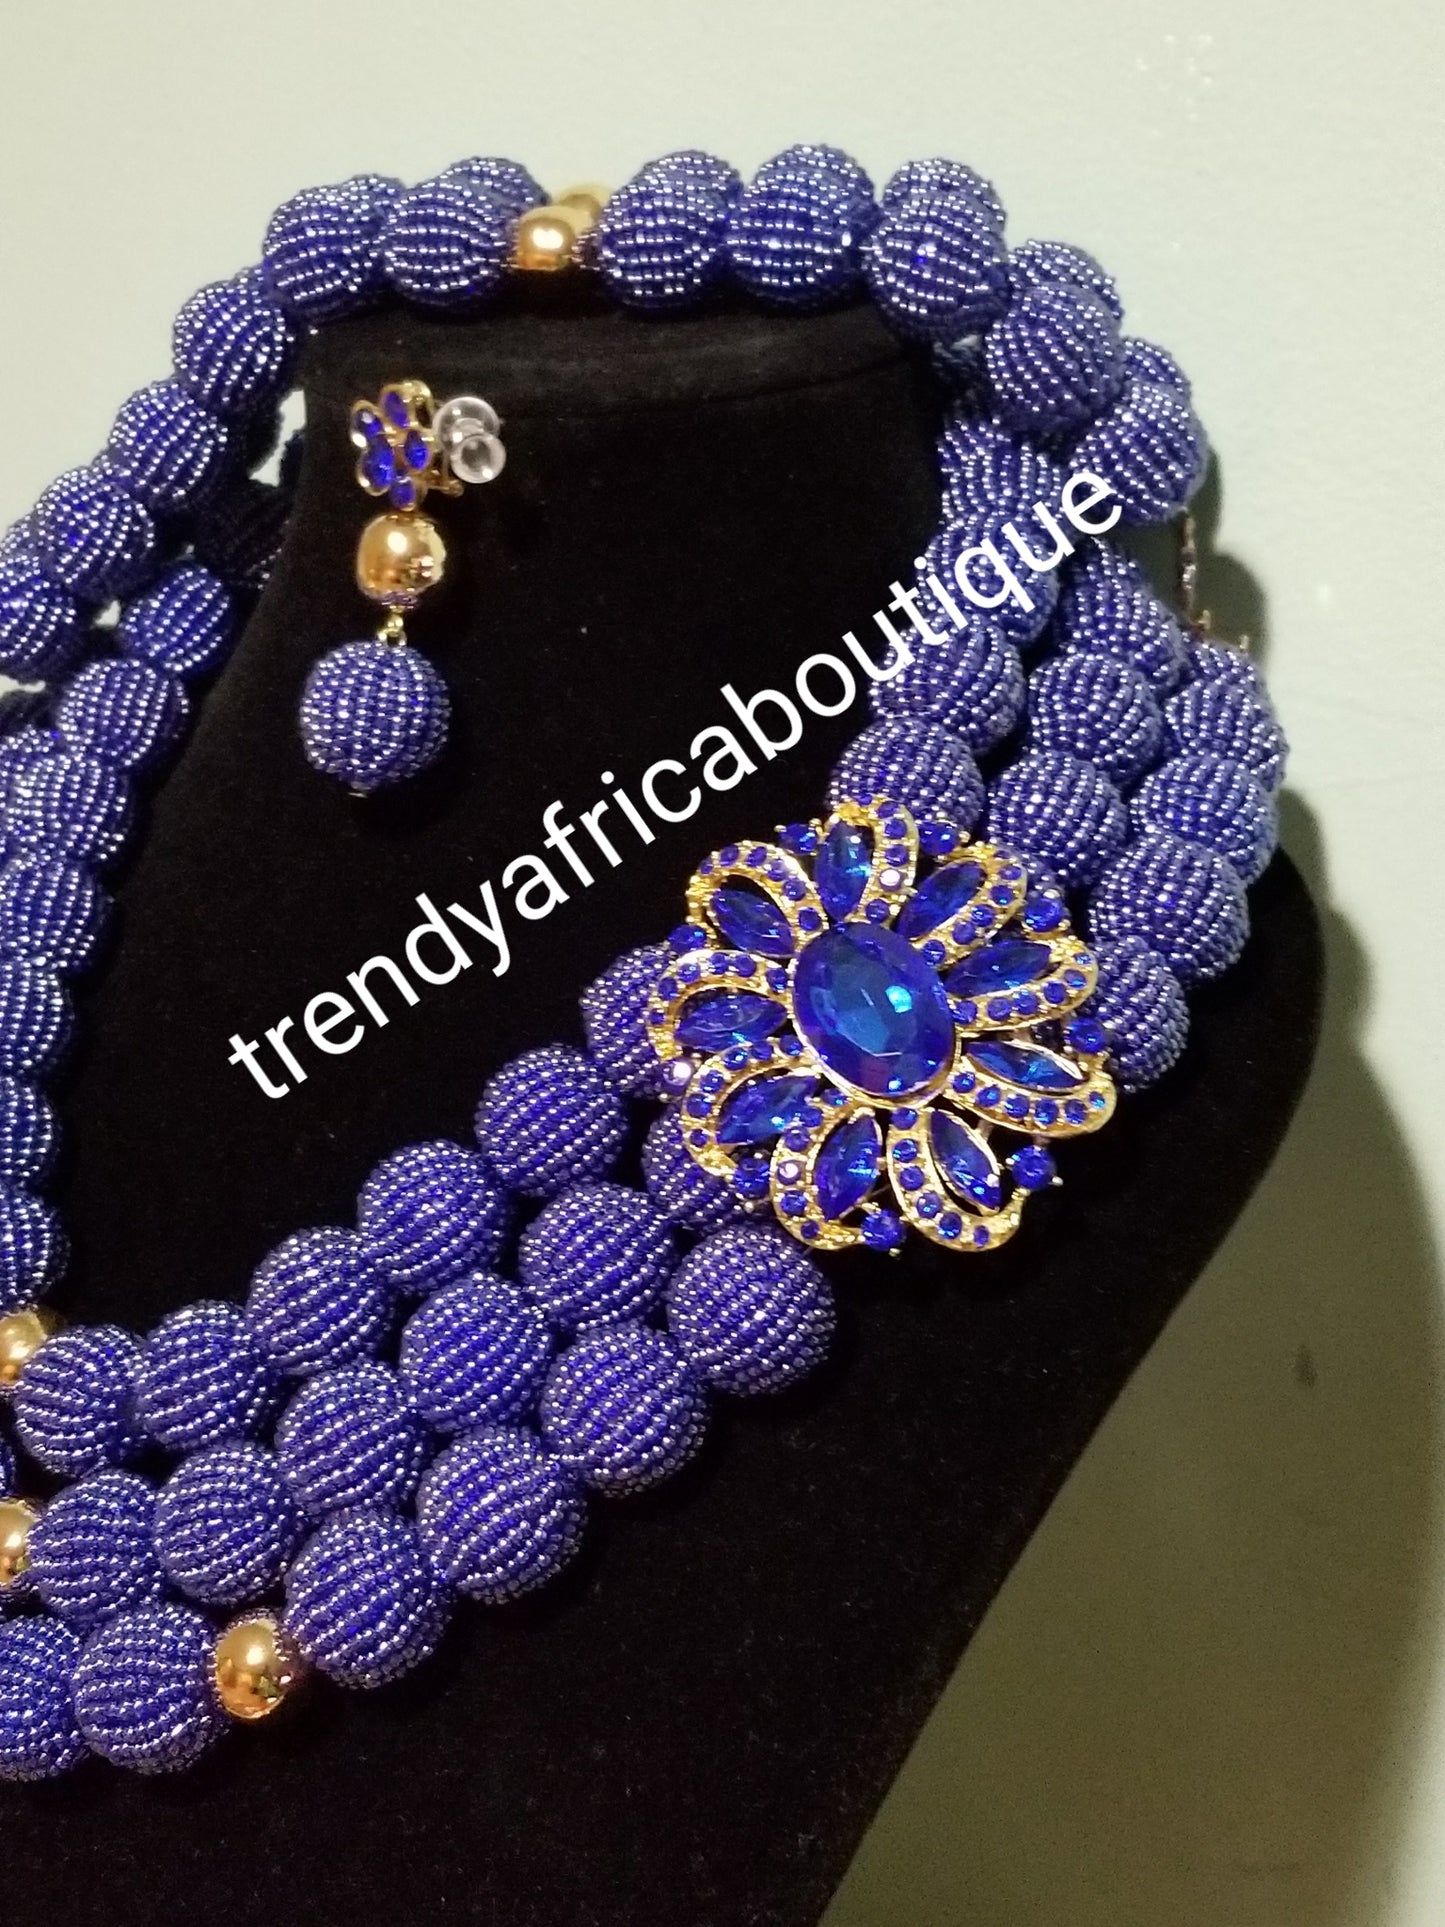 Special offer: royal blue  beaded-necklace set. 3 rows African party bead necklace. We also have coral-necklace set